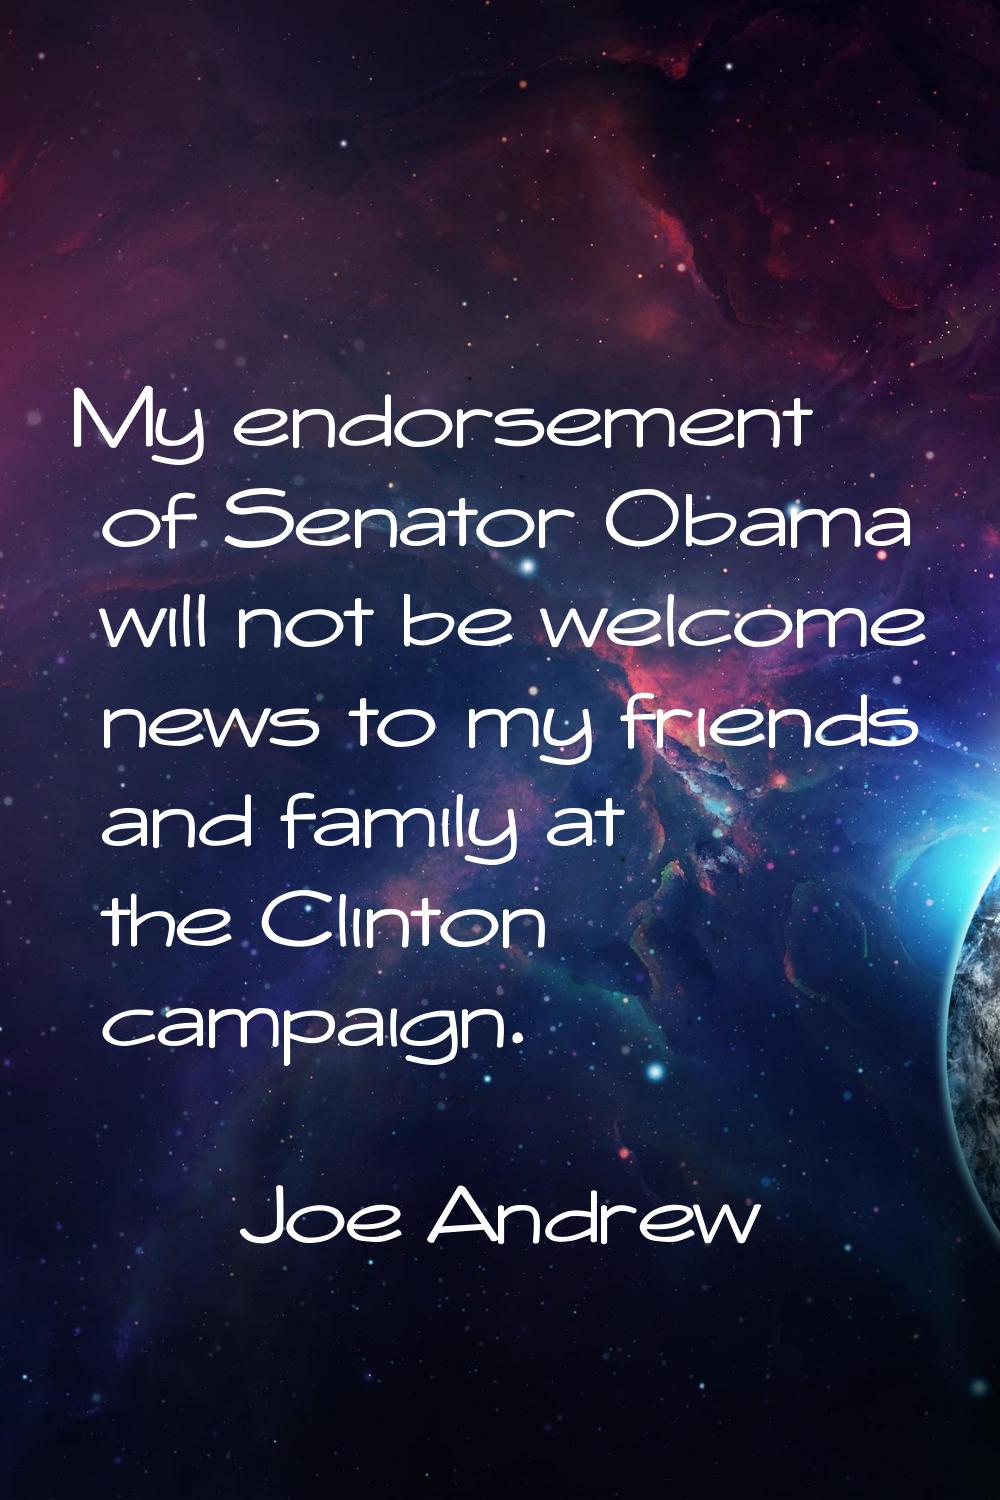 My endorsement of Senator Obama will not be welcome news to my friends and family at the Clinton ca